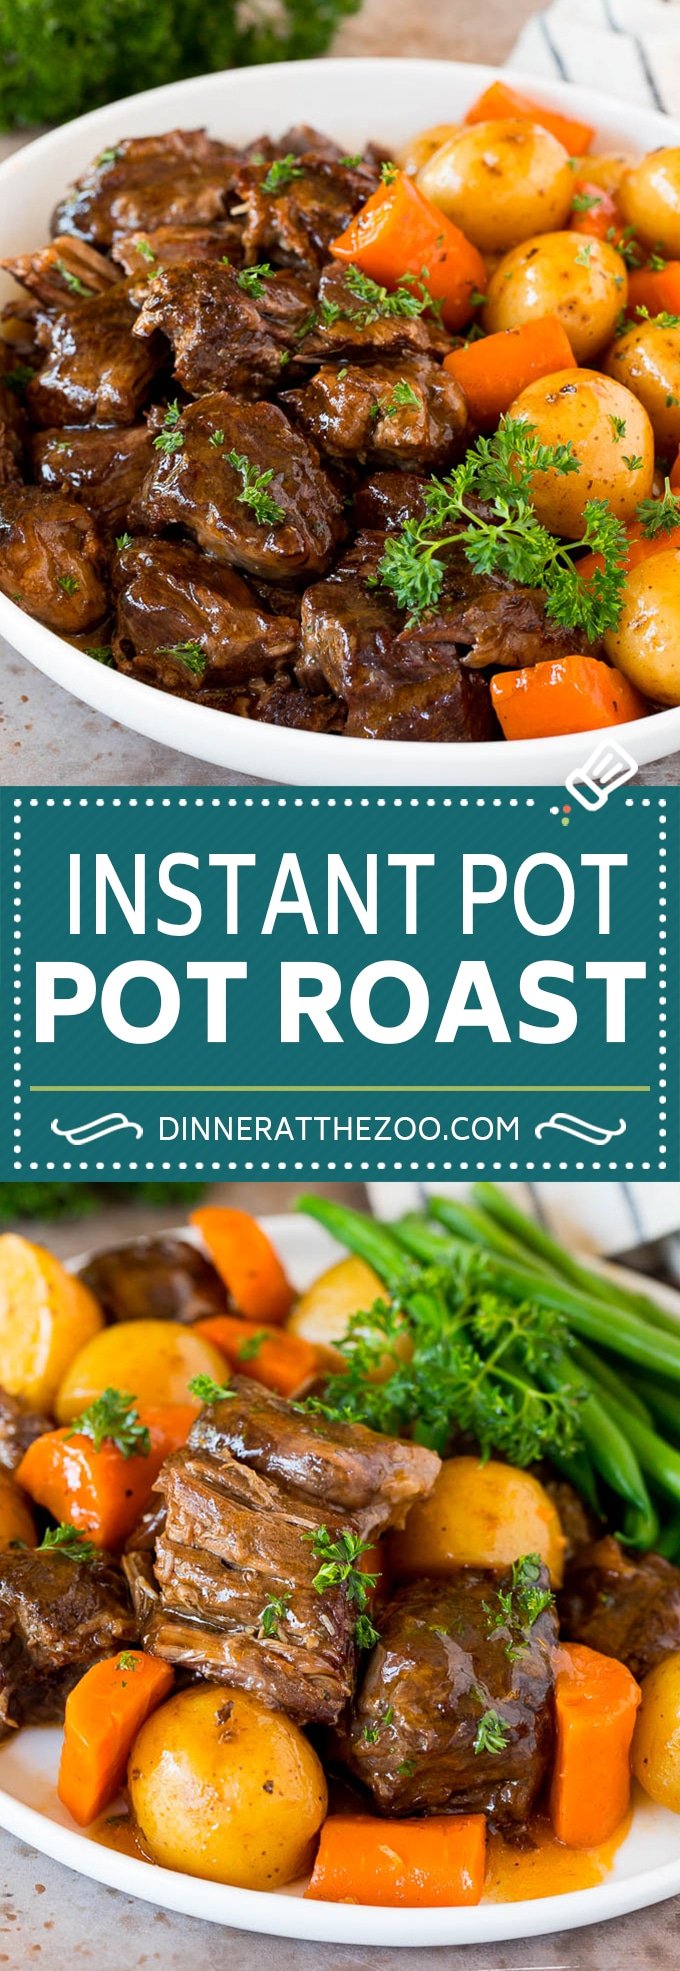 The best Instant Pot pot roast with beef, potatoes, carrots, herbs and spices, all cooked in the pressure cooker.